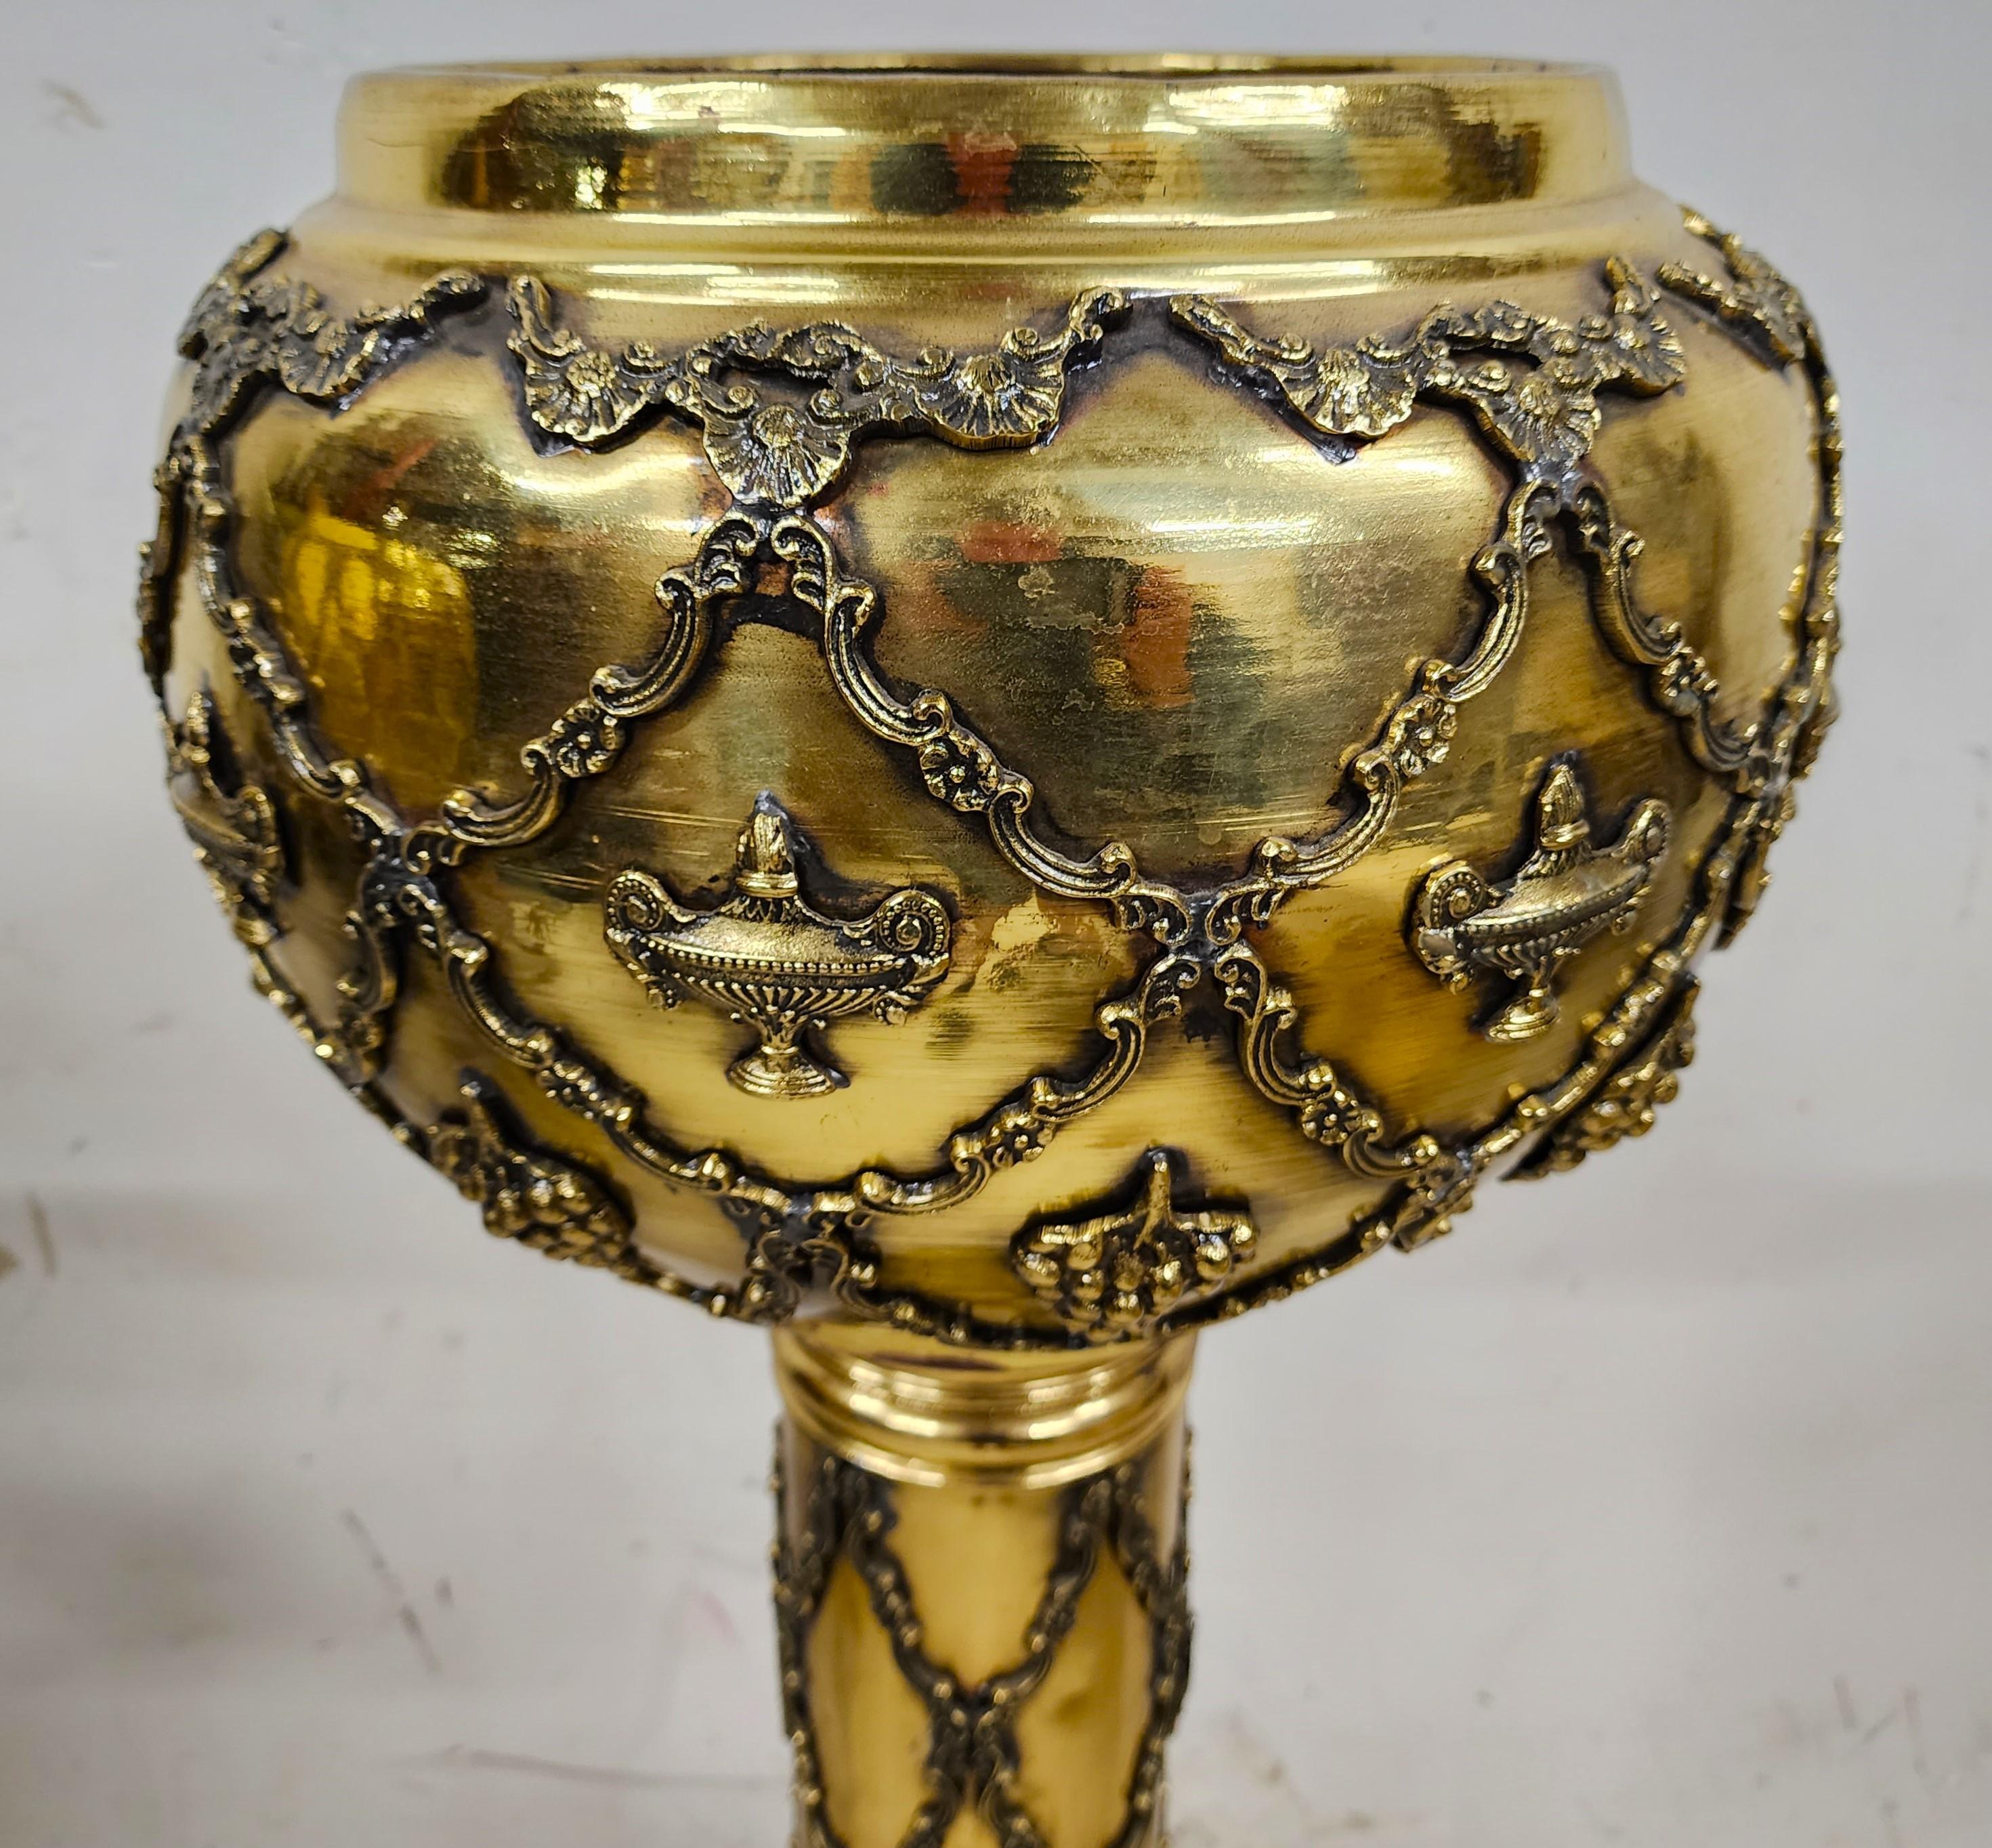 For FULL item description click on CONTINUE READING at the bottom of this page.

Offering one of our recent palm beach estate fine furniture acquisitions of a
set of 2 antique ornate pedestal brass planter stands
They have different but similar